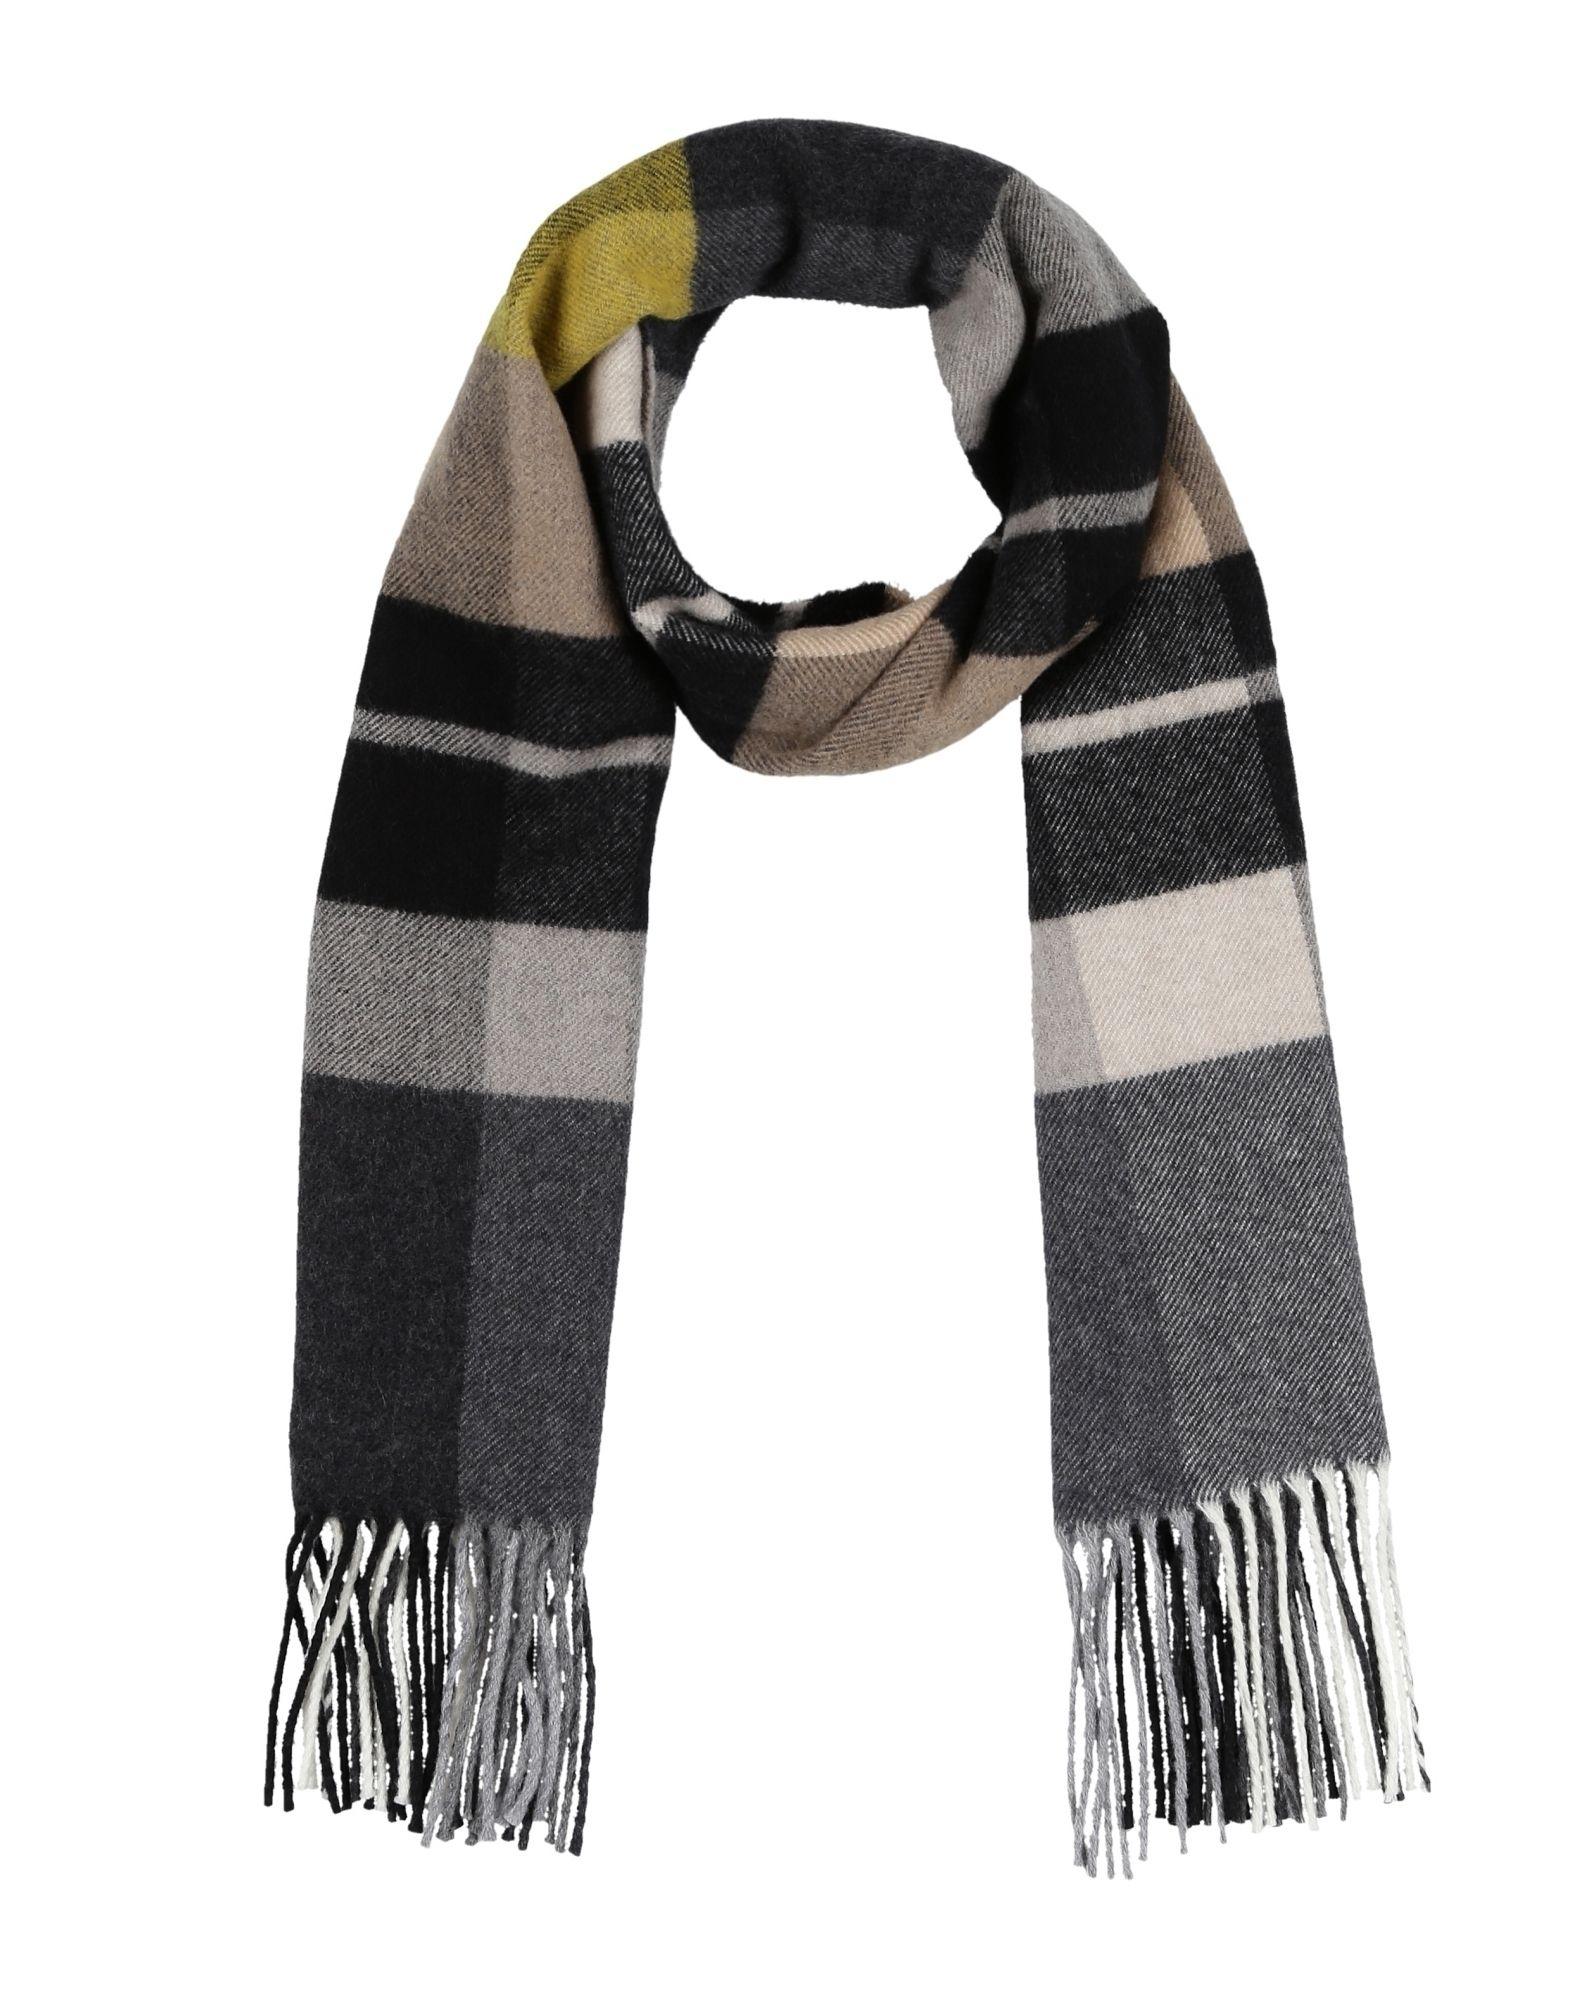 DSquared² Oblong Scarf in Grey (Gray) for Men - Lyst